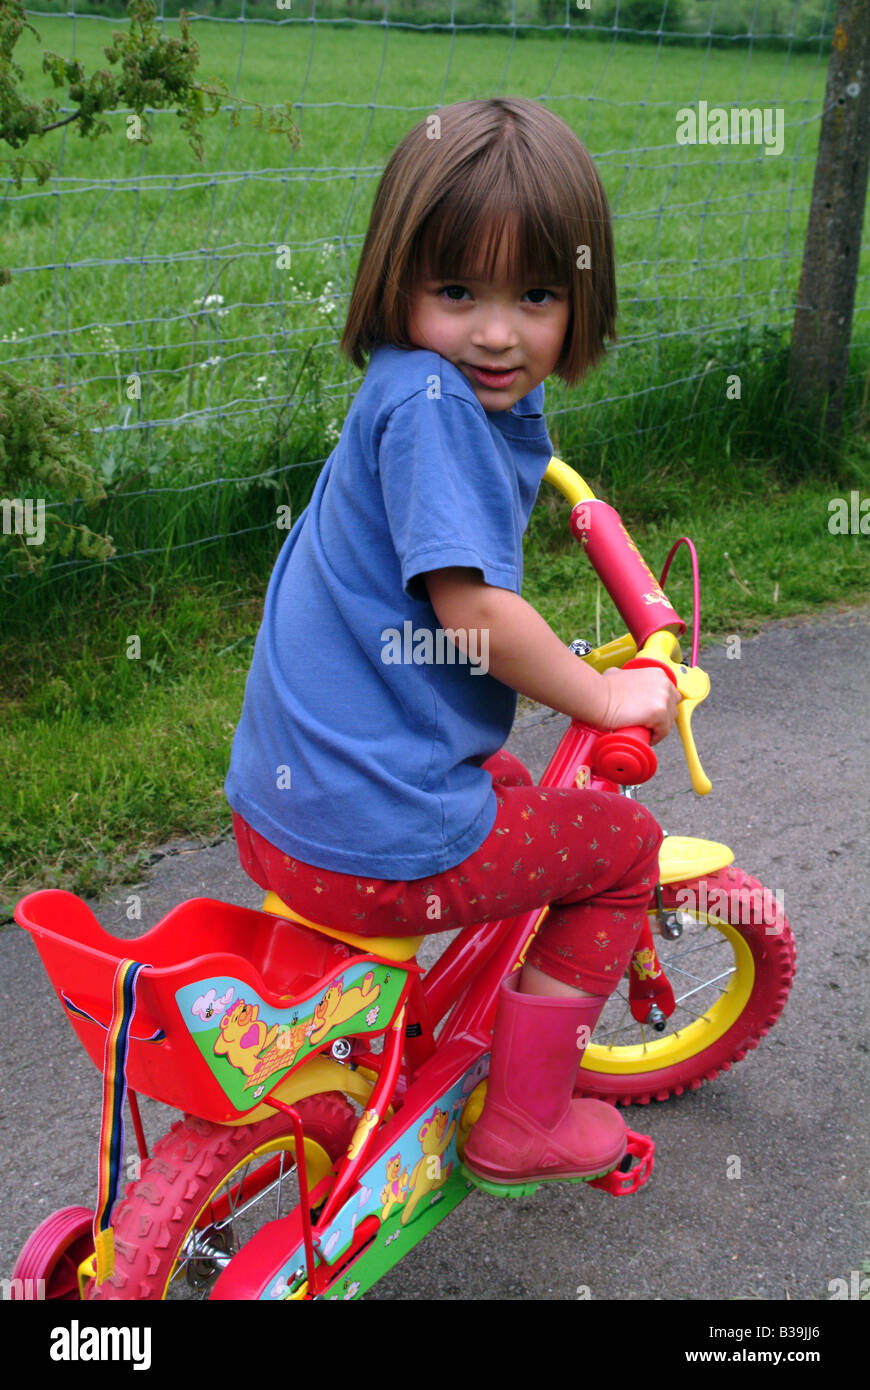 Portrait of a girl cycling with stabilisers Stock Photo